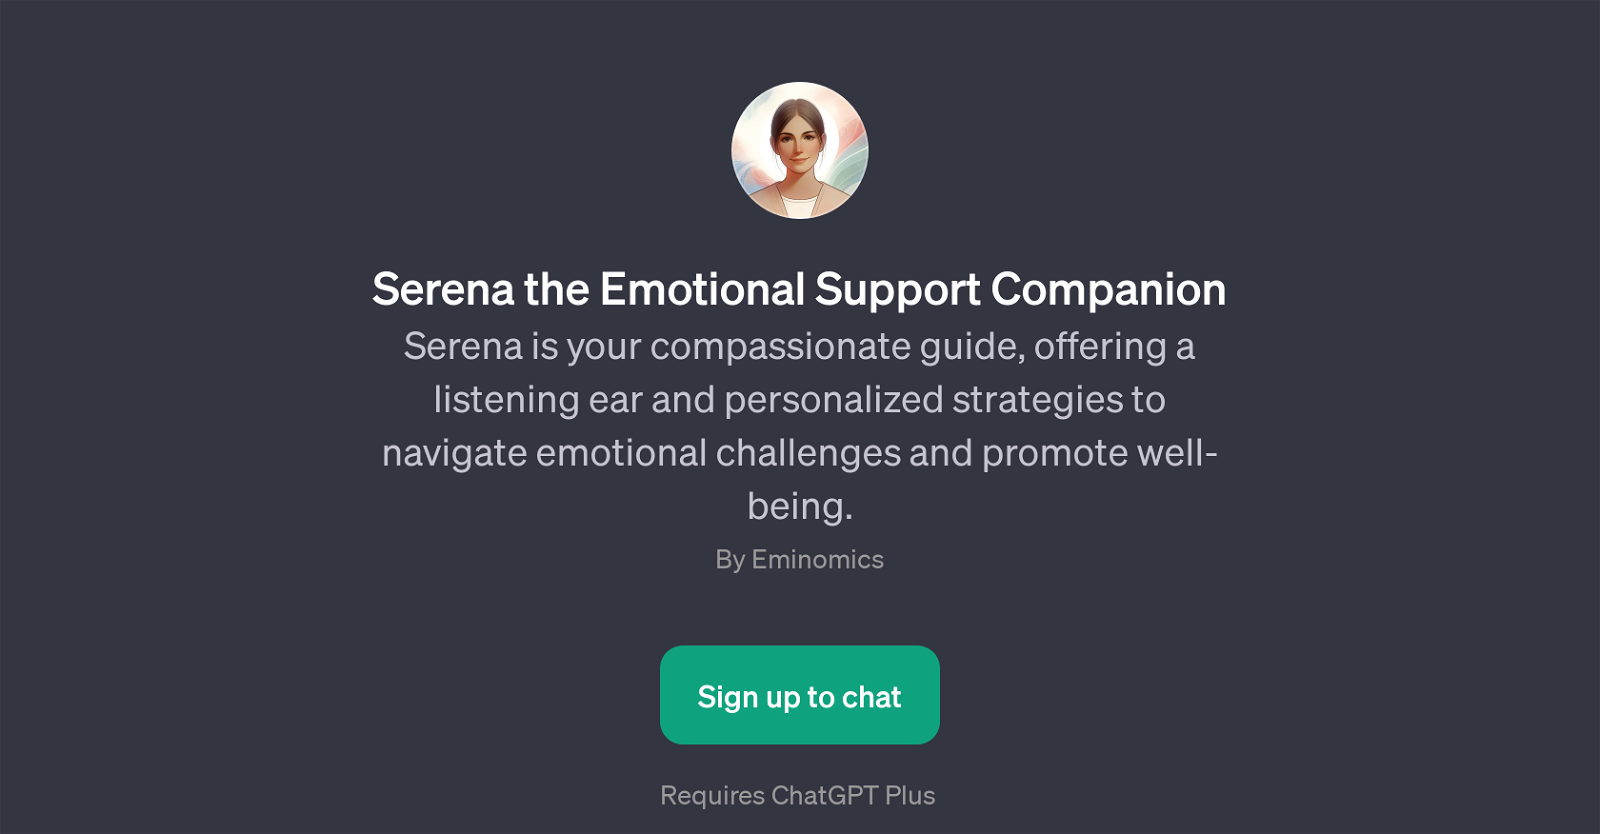 Serena the Emotional Support Companion website